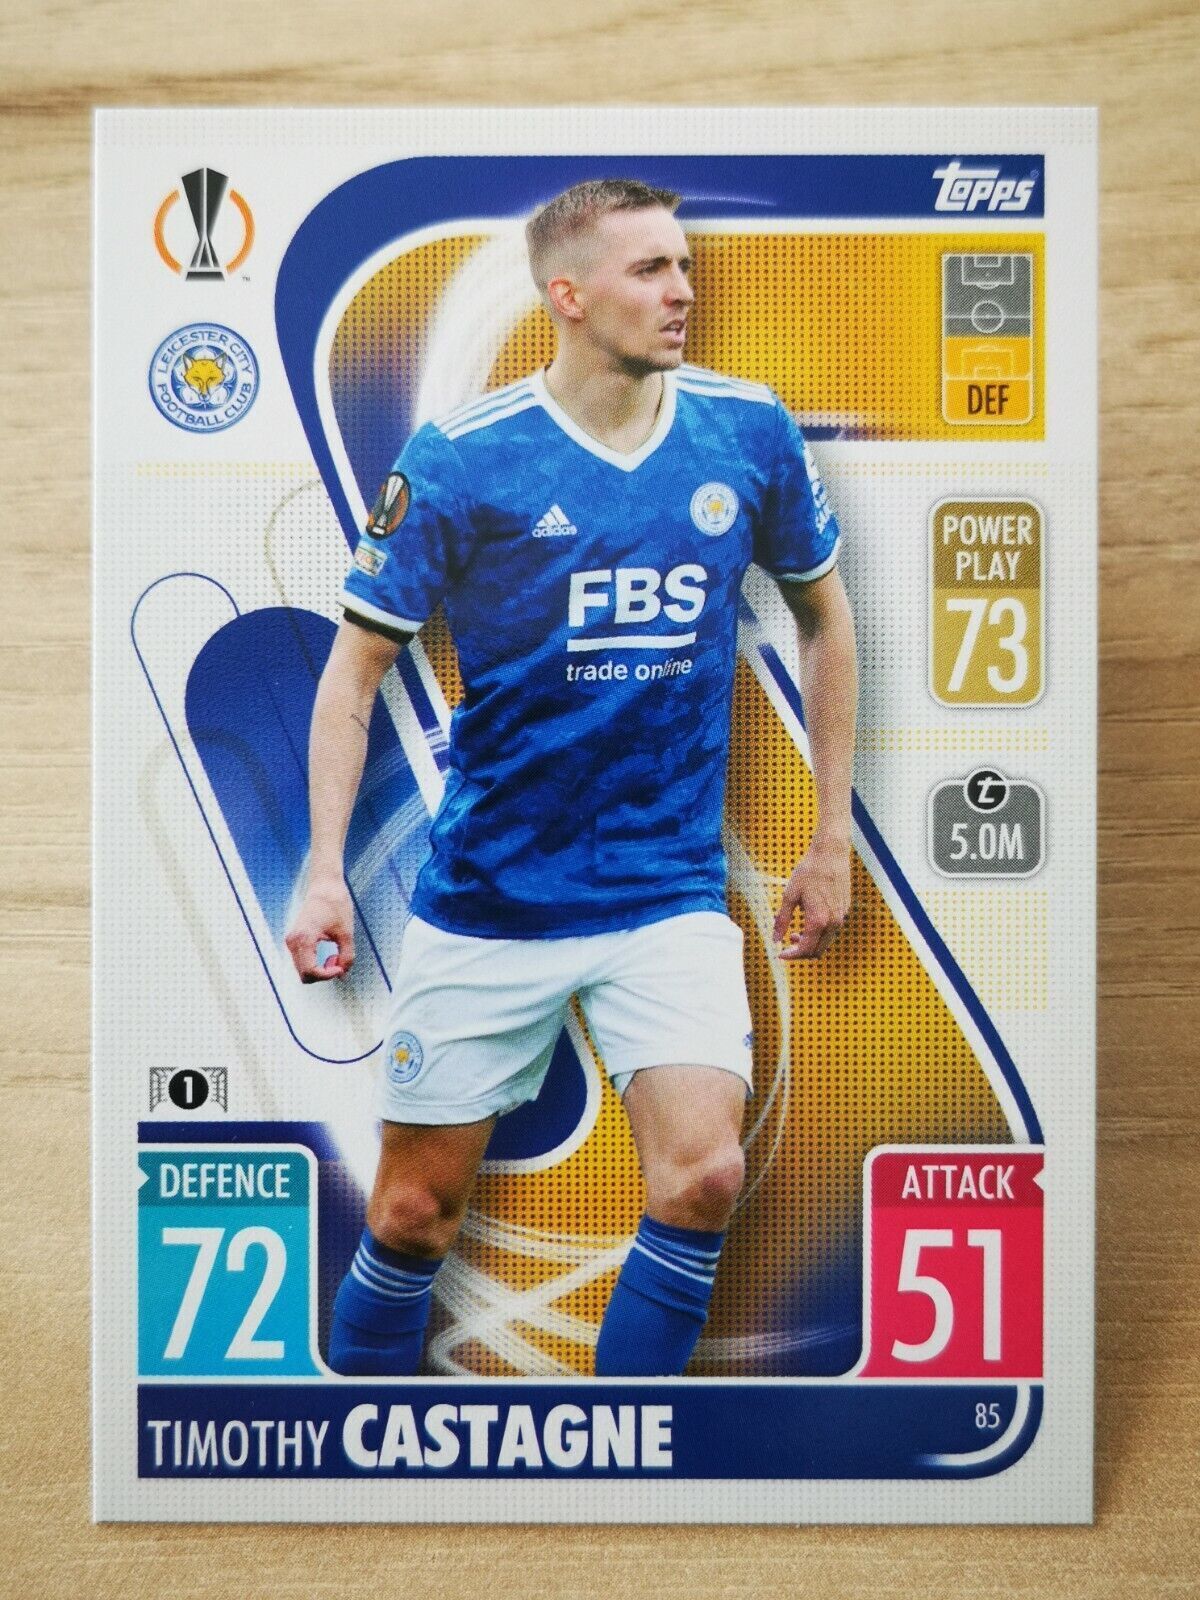 Topps C72 match attax 2021-22 champions league #85 Timothy Castagne - Leicester